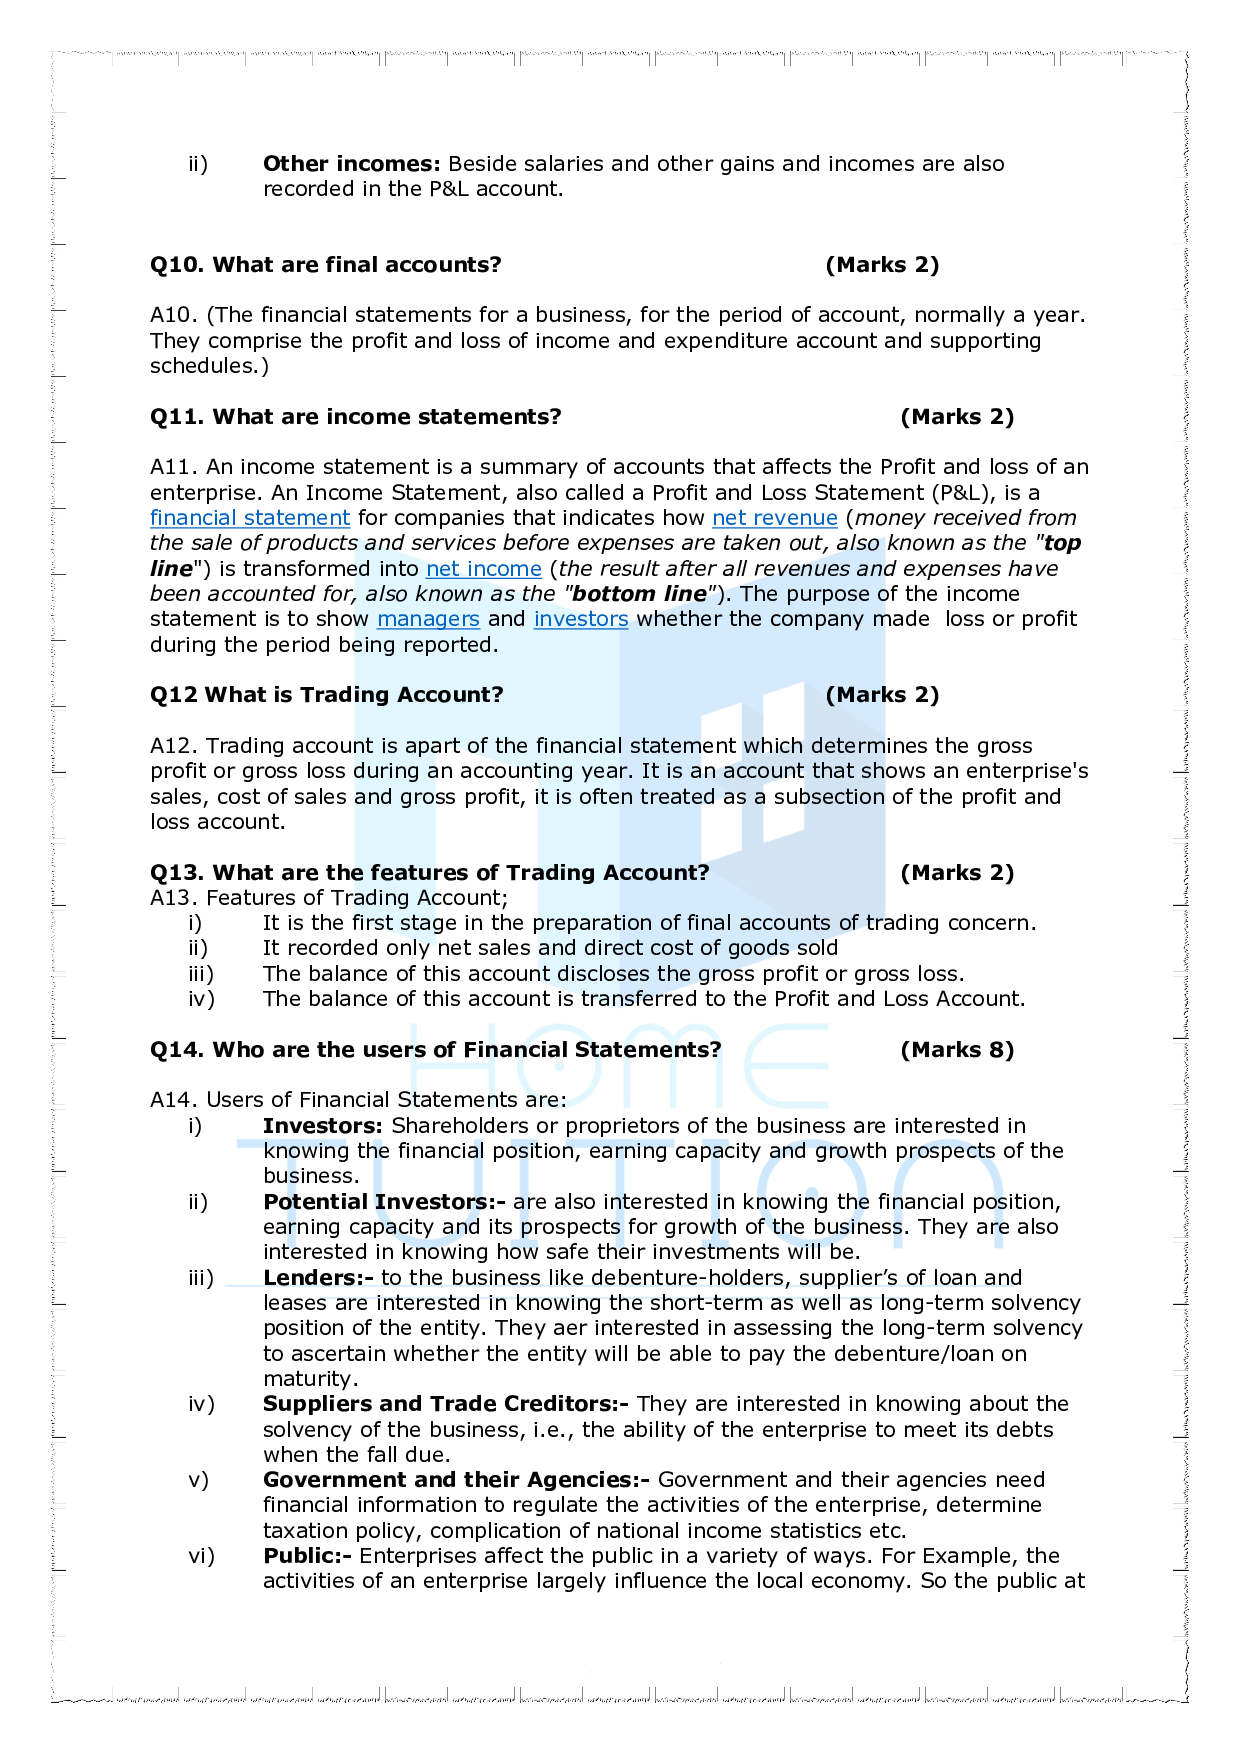 Chapter 9-Financial Statements-1